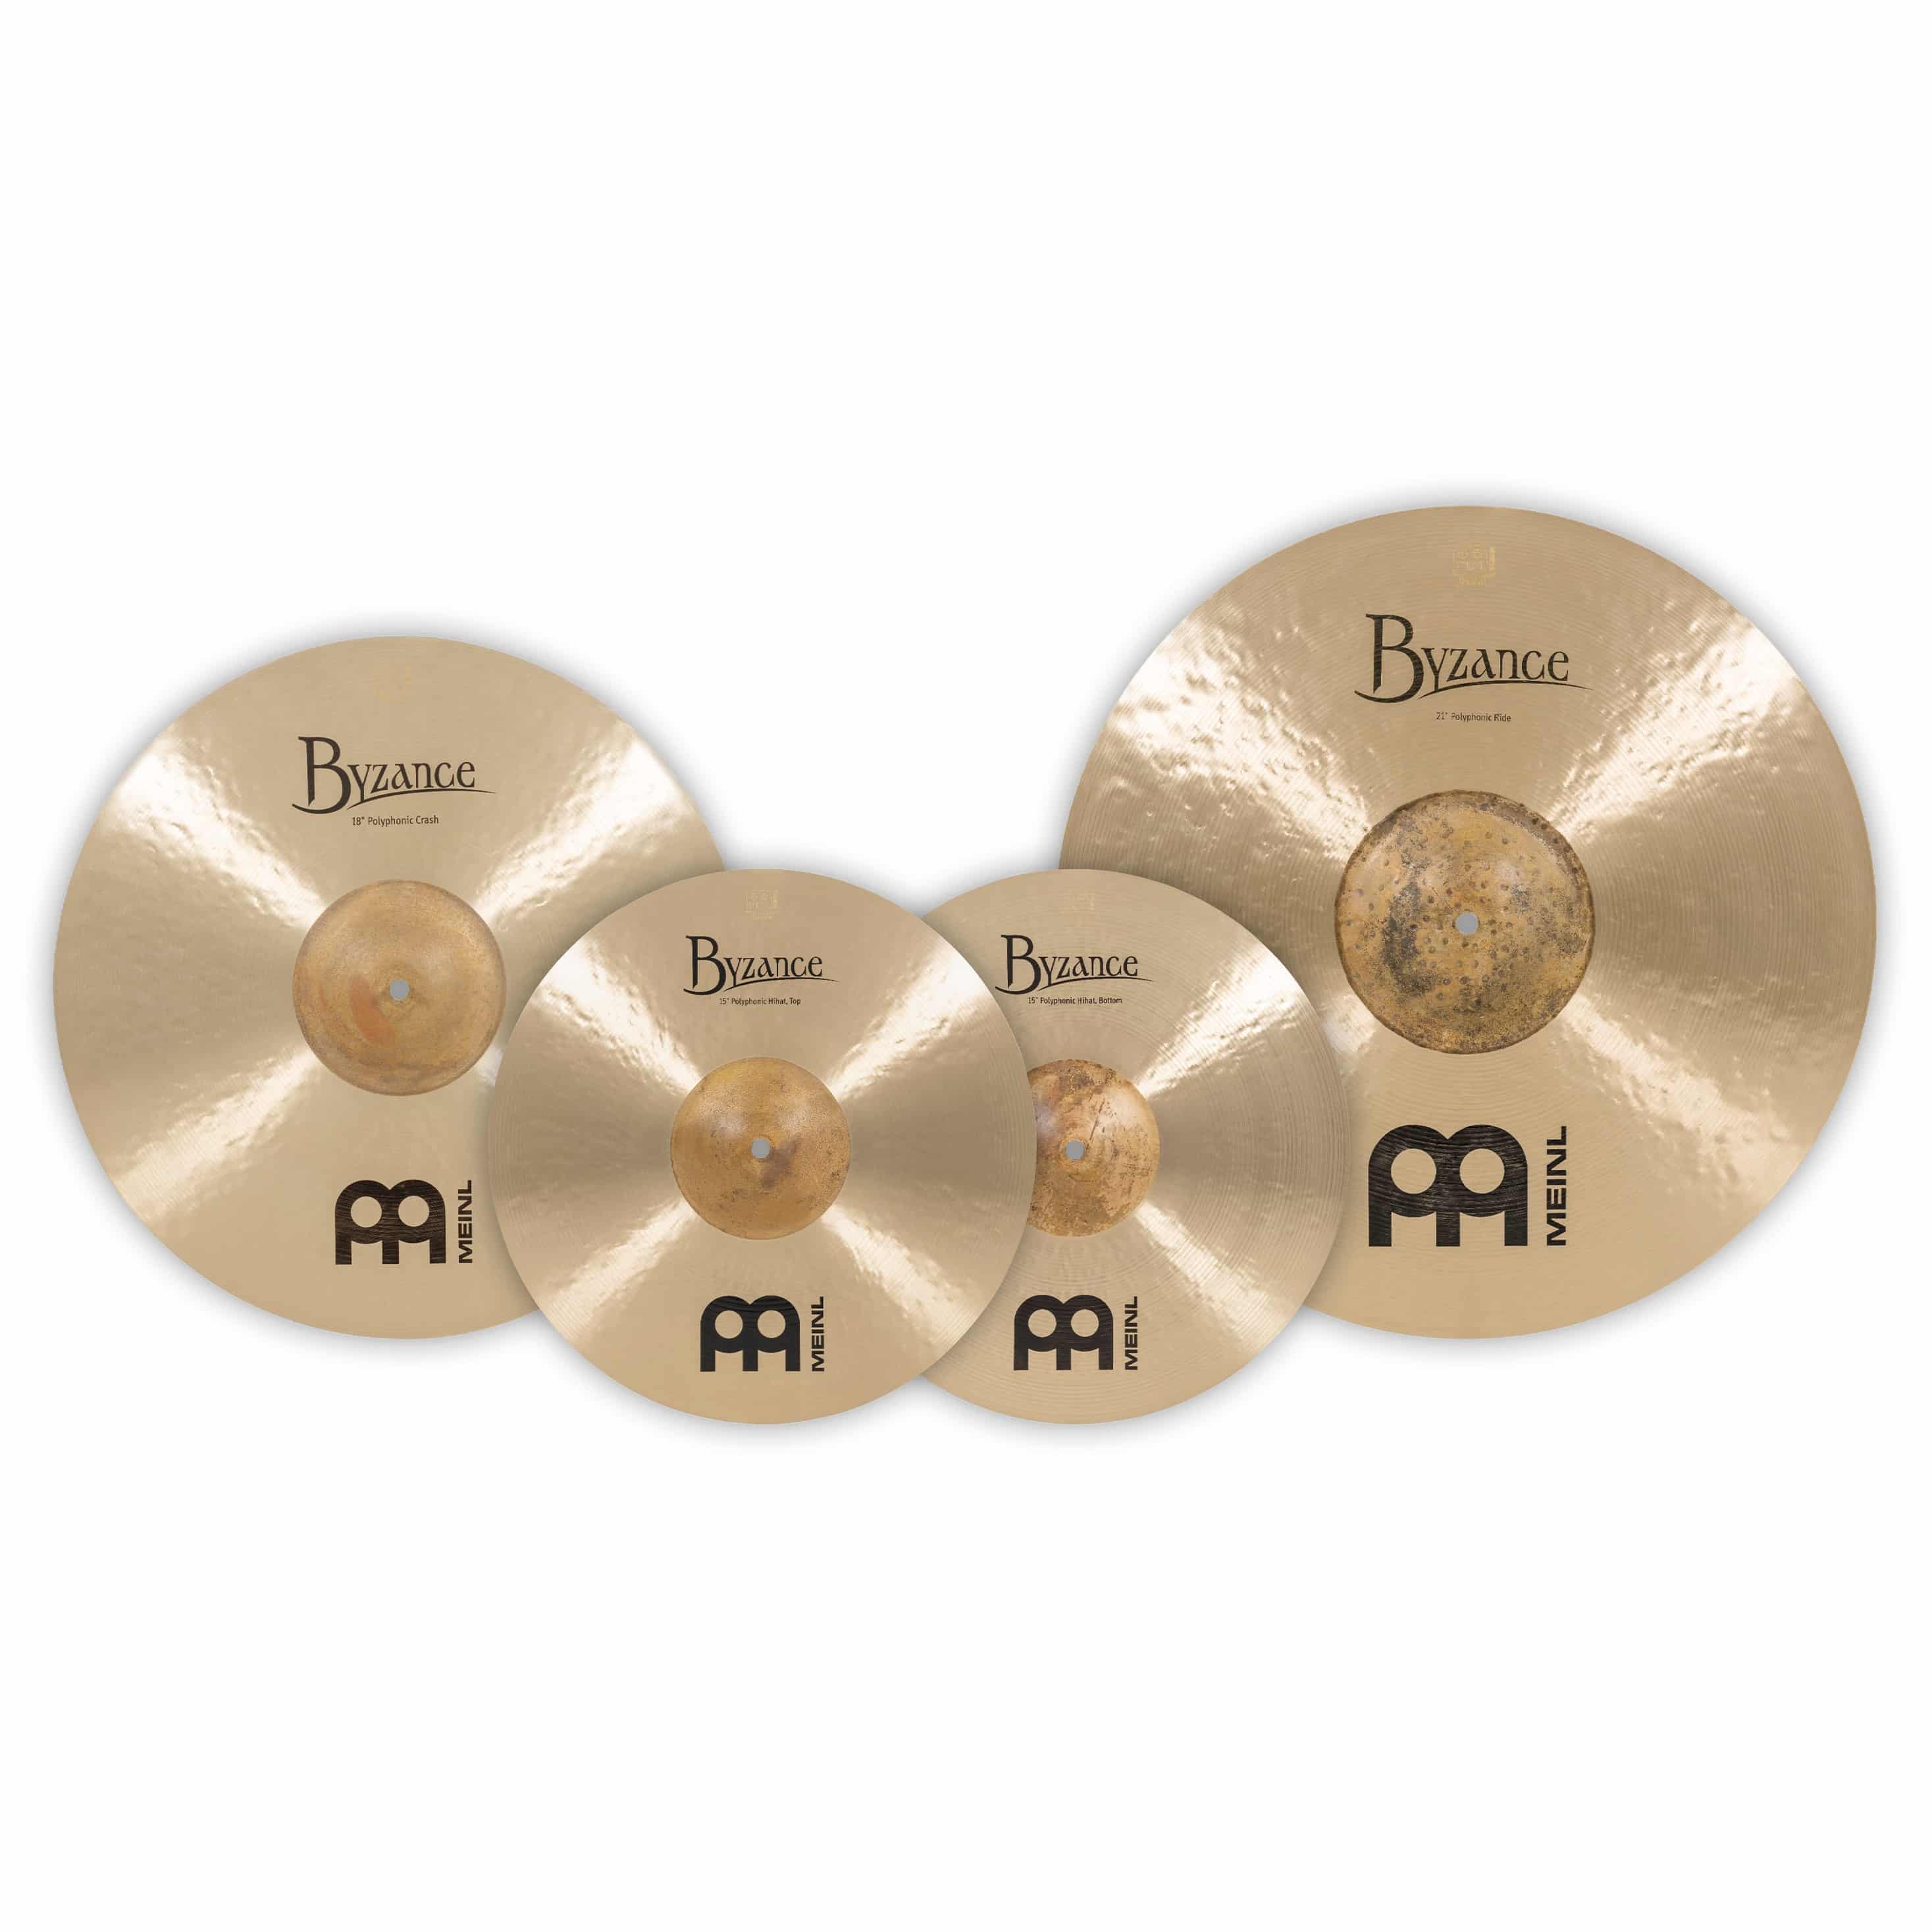 Meinl Cymbals BT-CS2 - Byzance Traditional Complete Cymbal Set 1